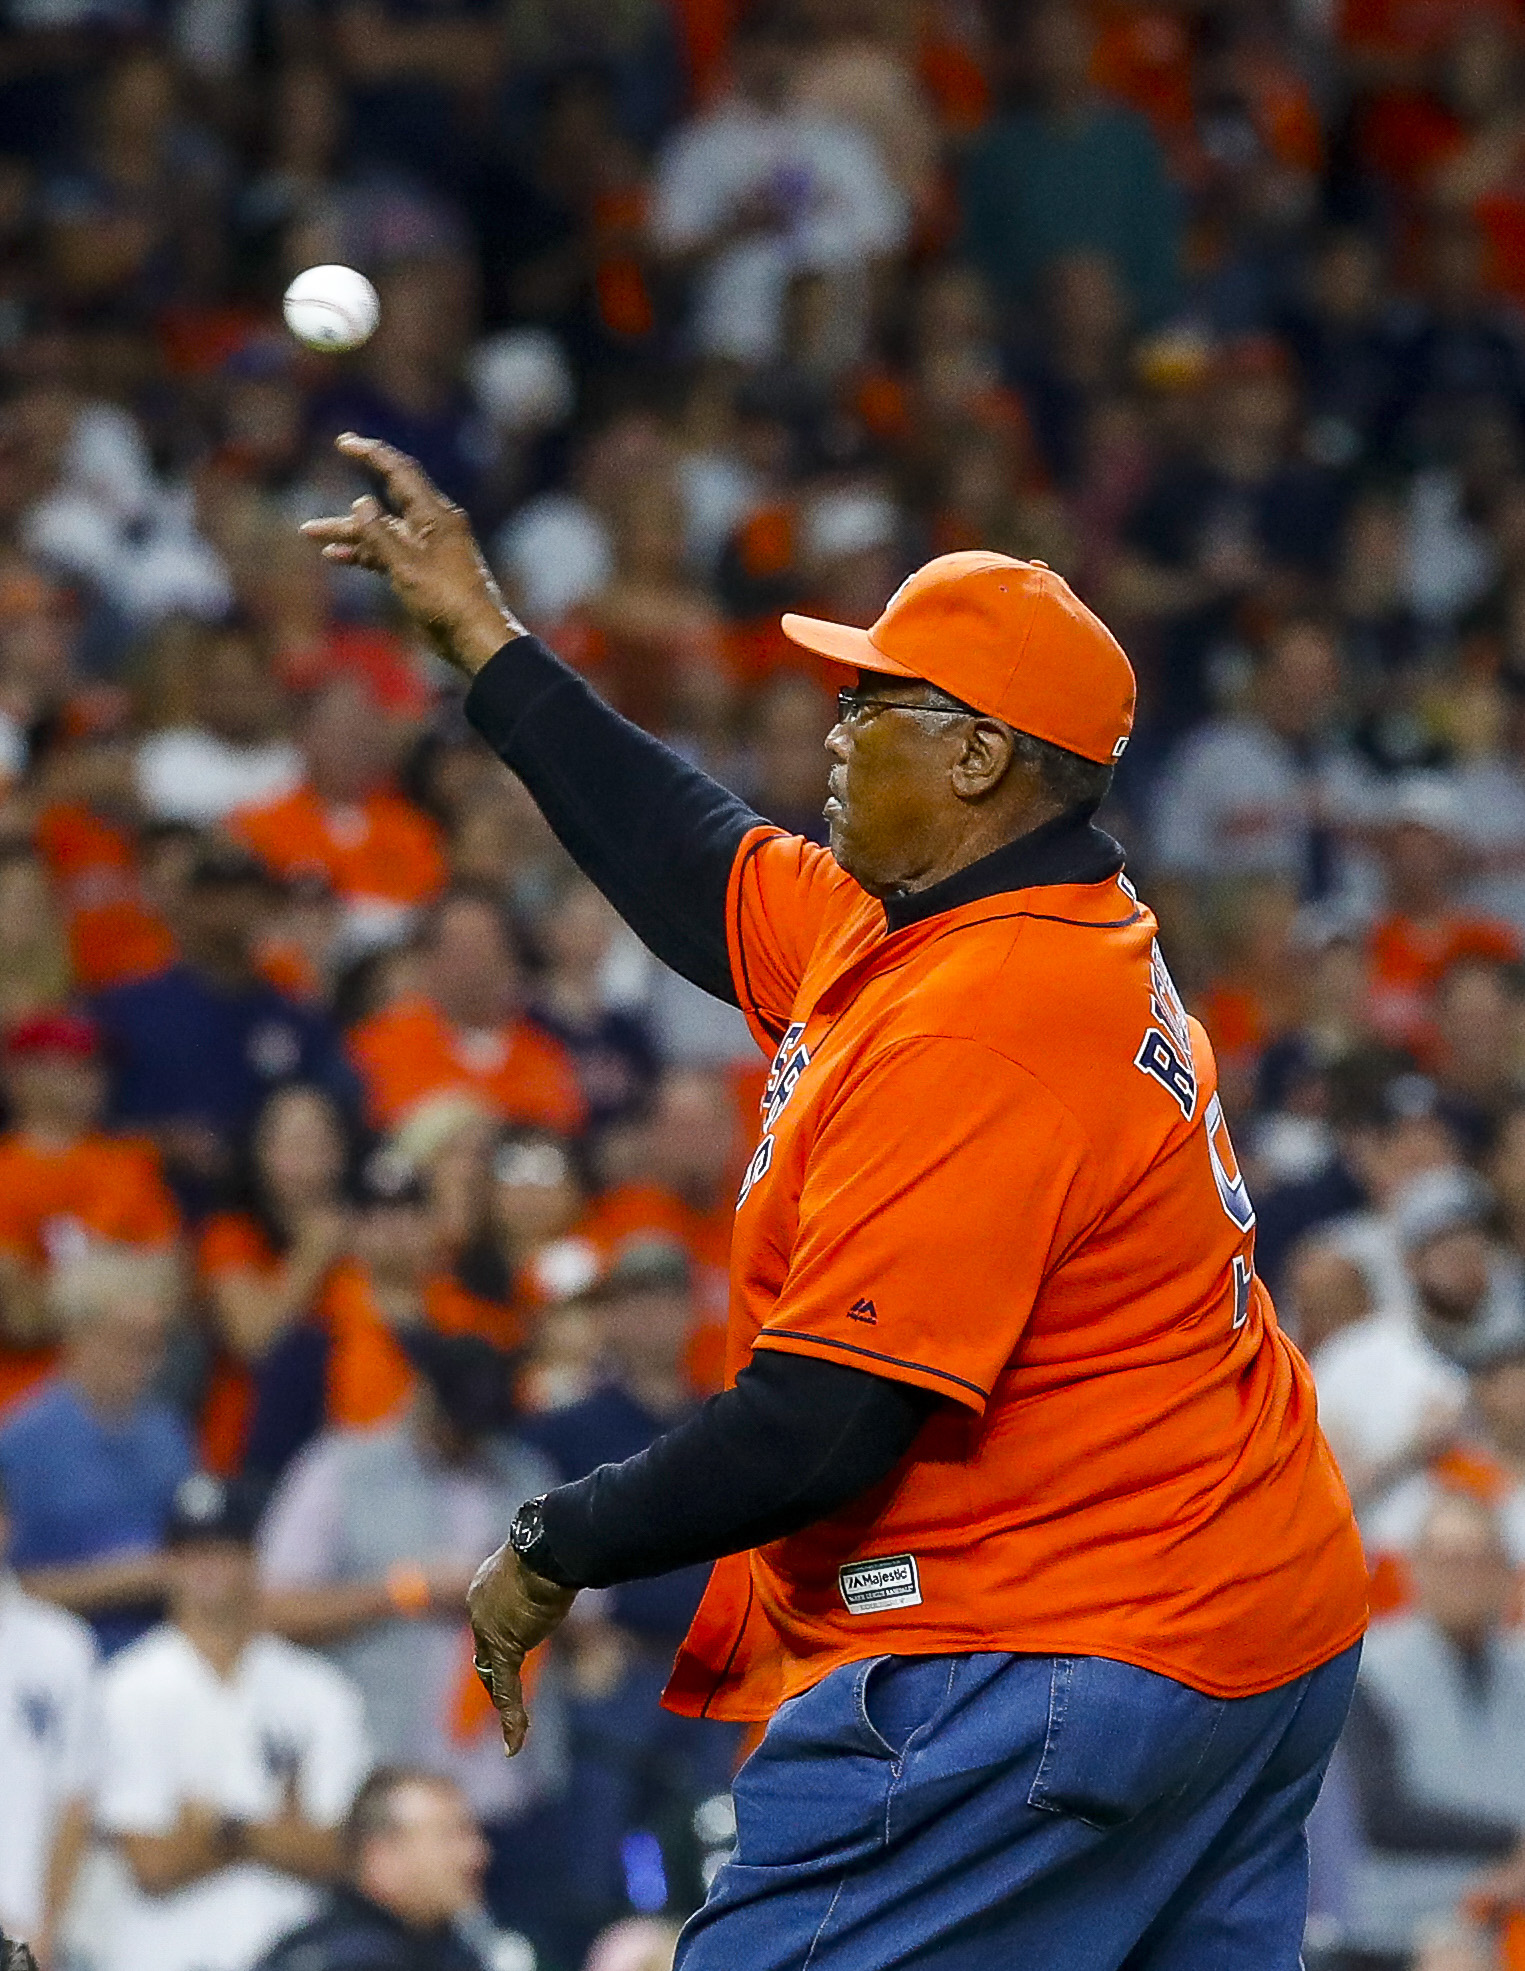 Travis Scott threw out the ceremonial first pitch at Minute Maid